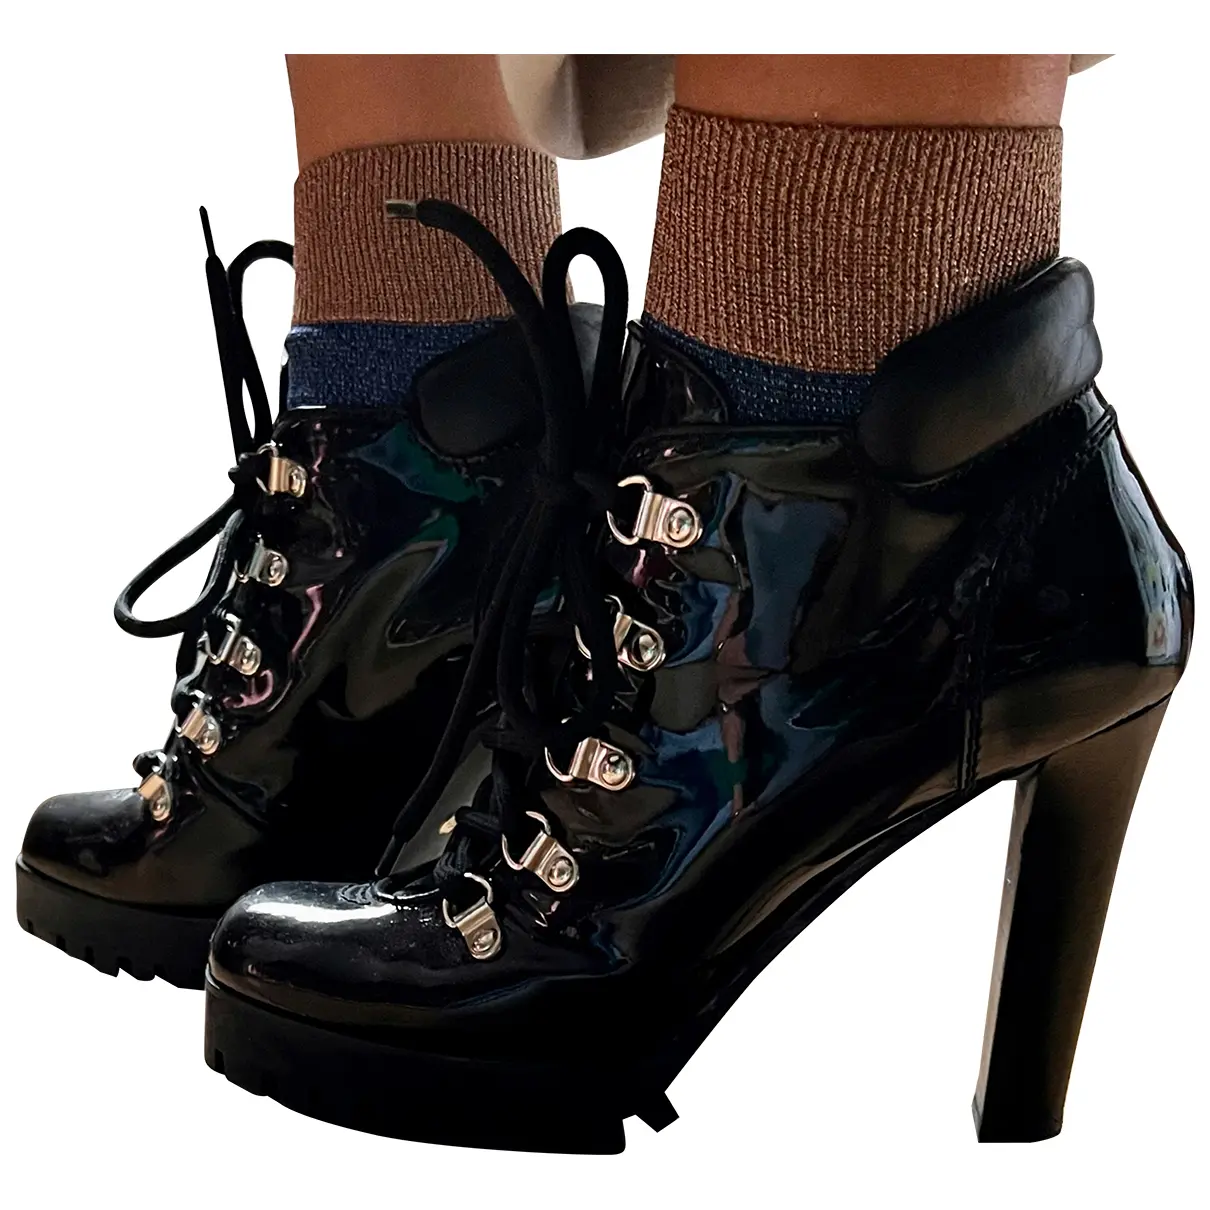 Patent leather lace up boots Dsquared2